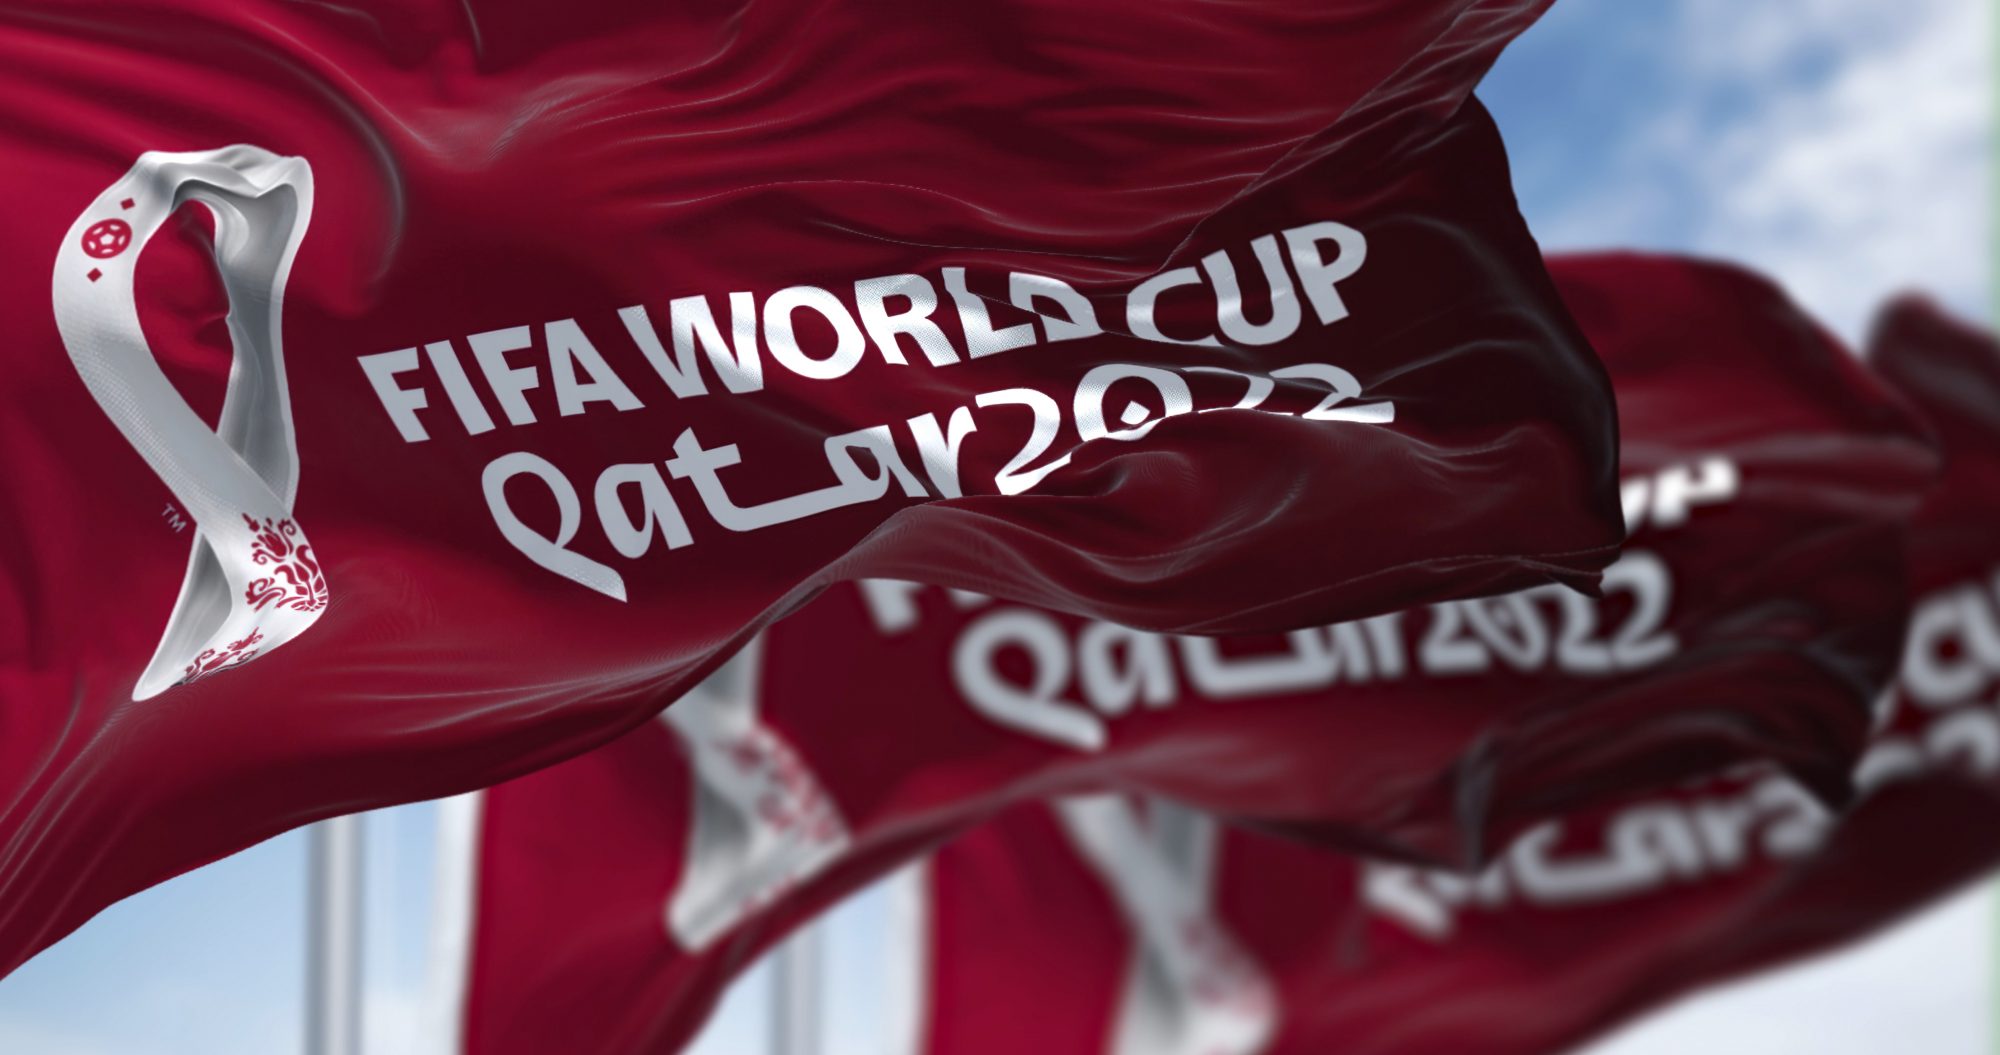 Qatar Wants to Host Olympics Next - Front Office Sports